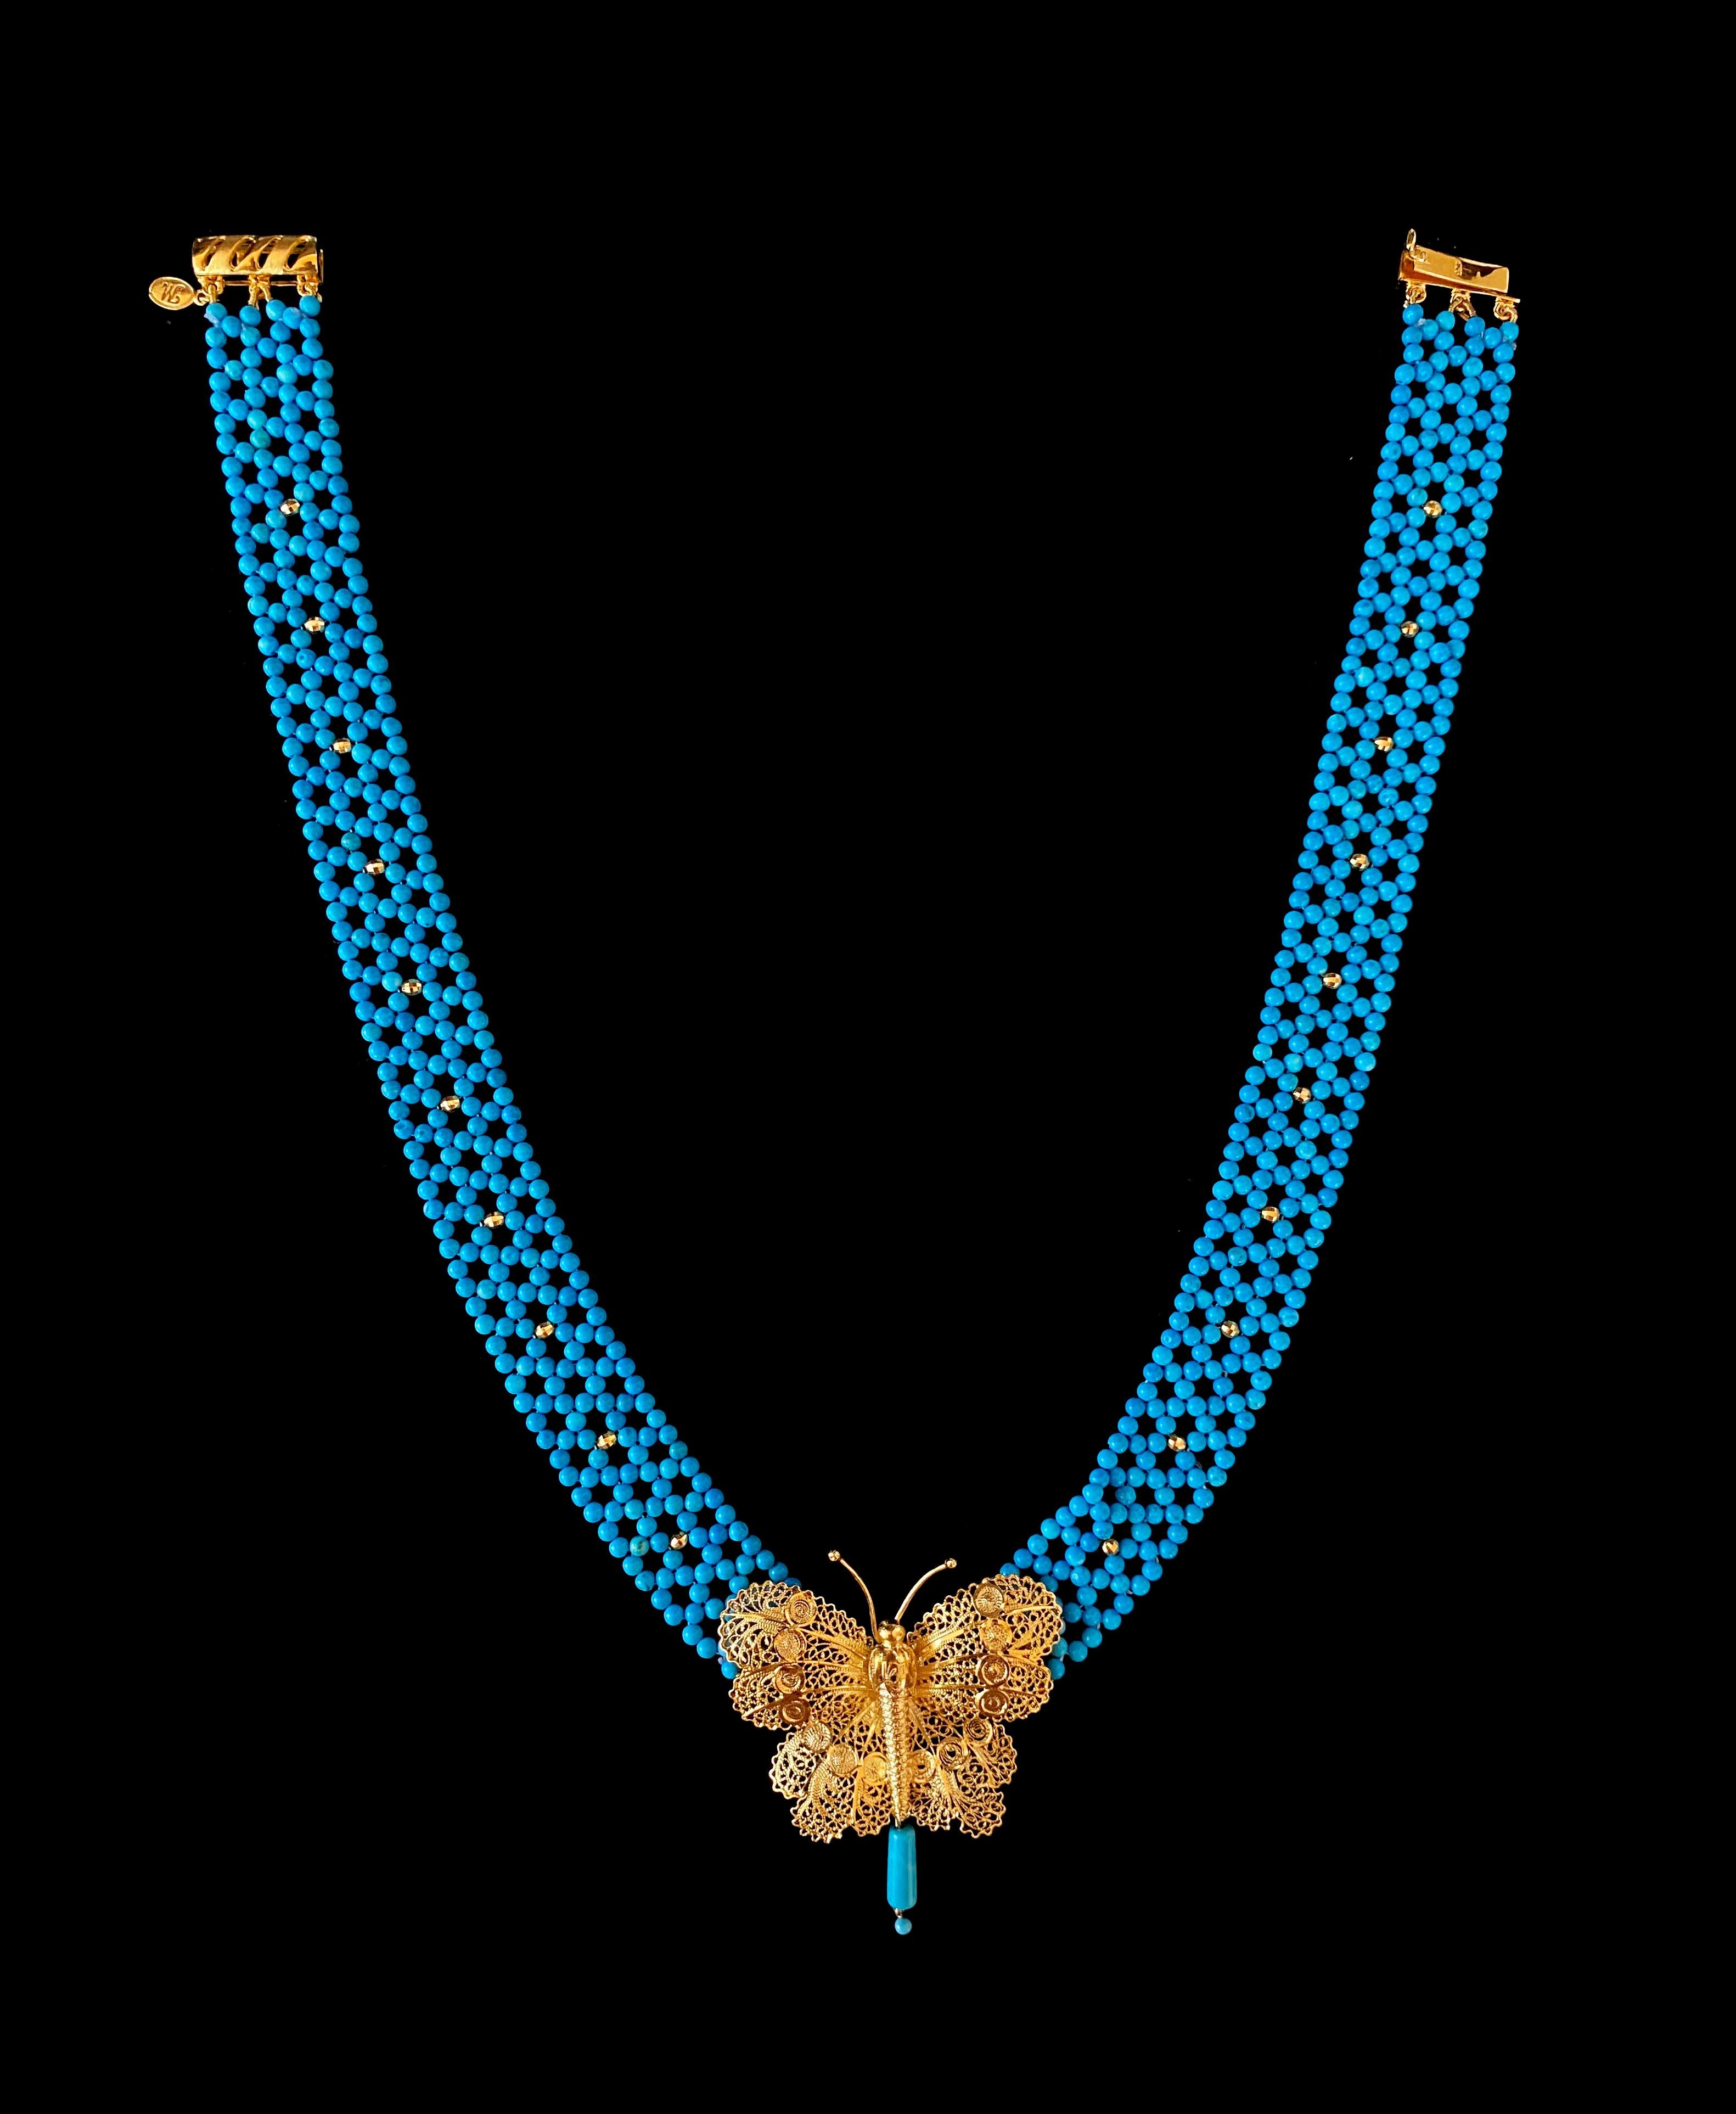 Marina J. Turquoise Woven Necklace with Yellow Gold Butterfly Centerpiece For Sale 2